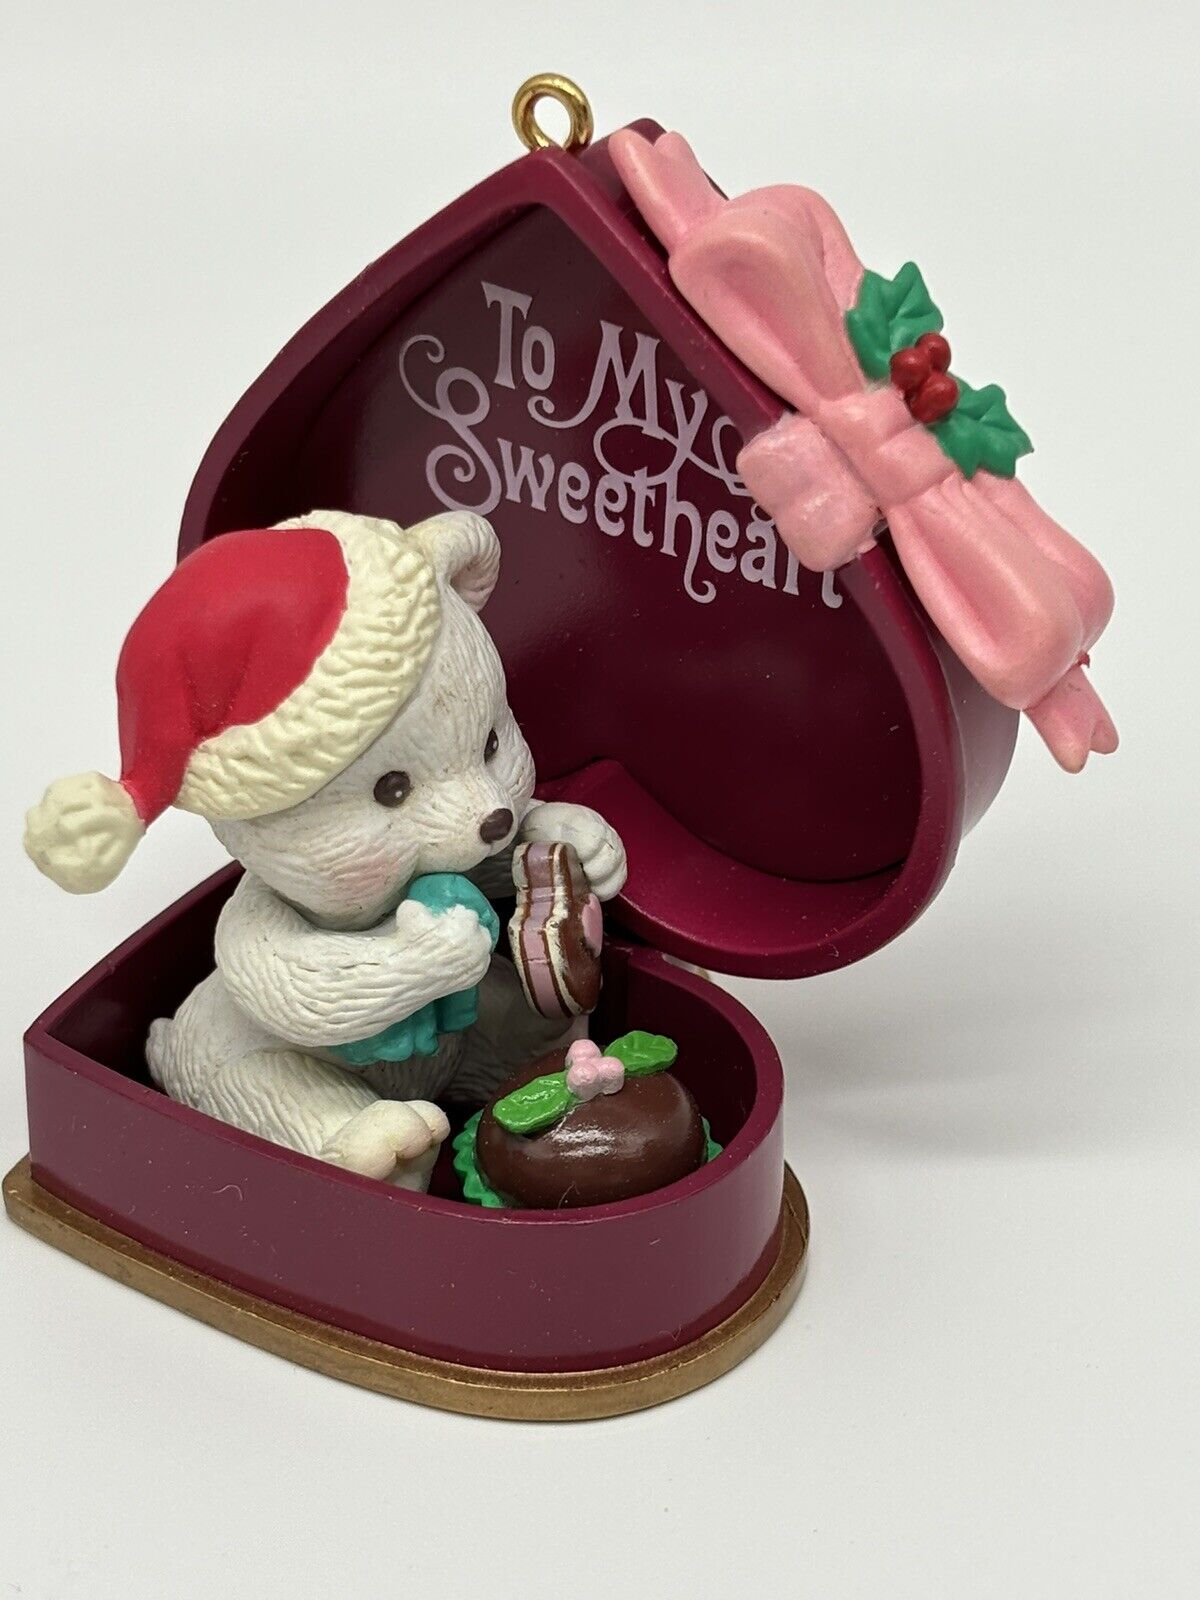 ENESCO CHRISTMAS ORNAMENT SWEETS FOR MY SWEETIE 1994 Bear Holiday